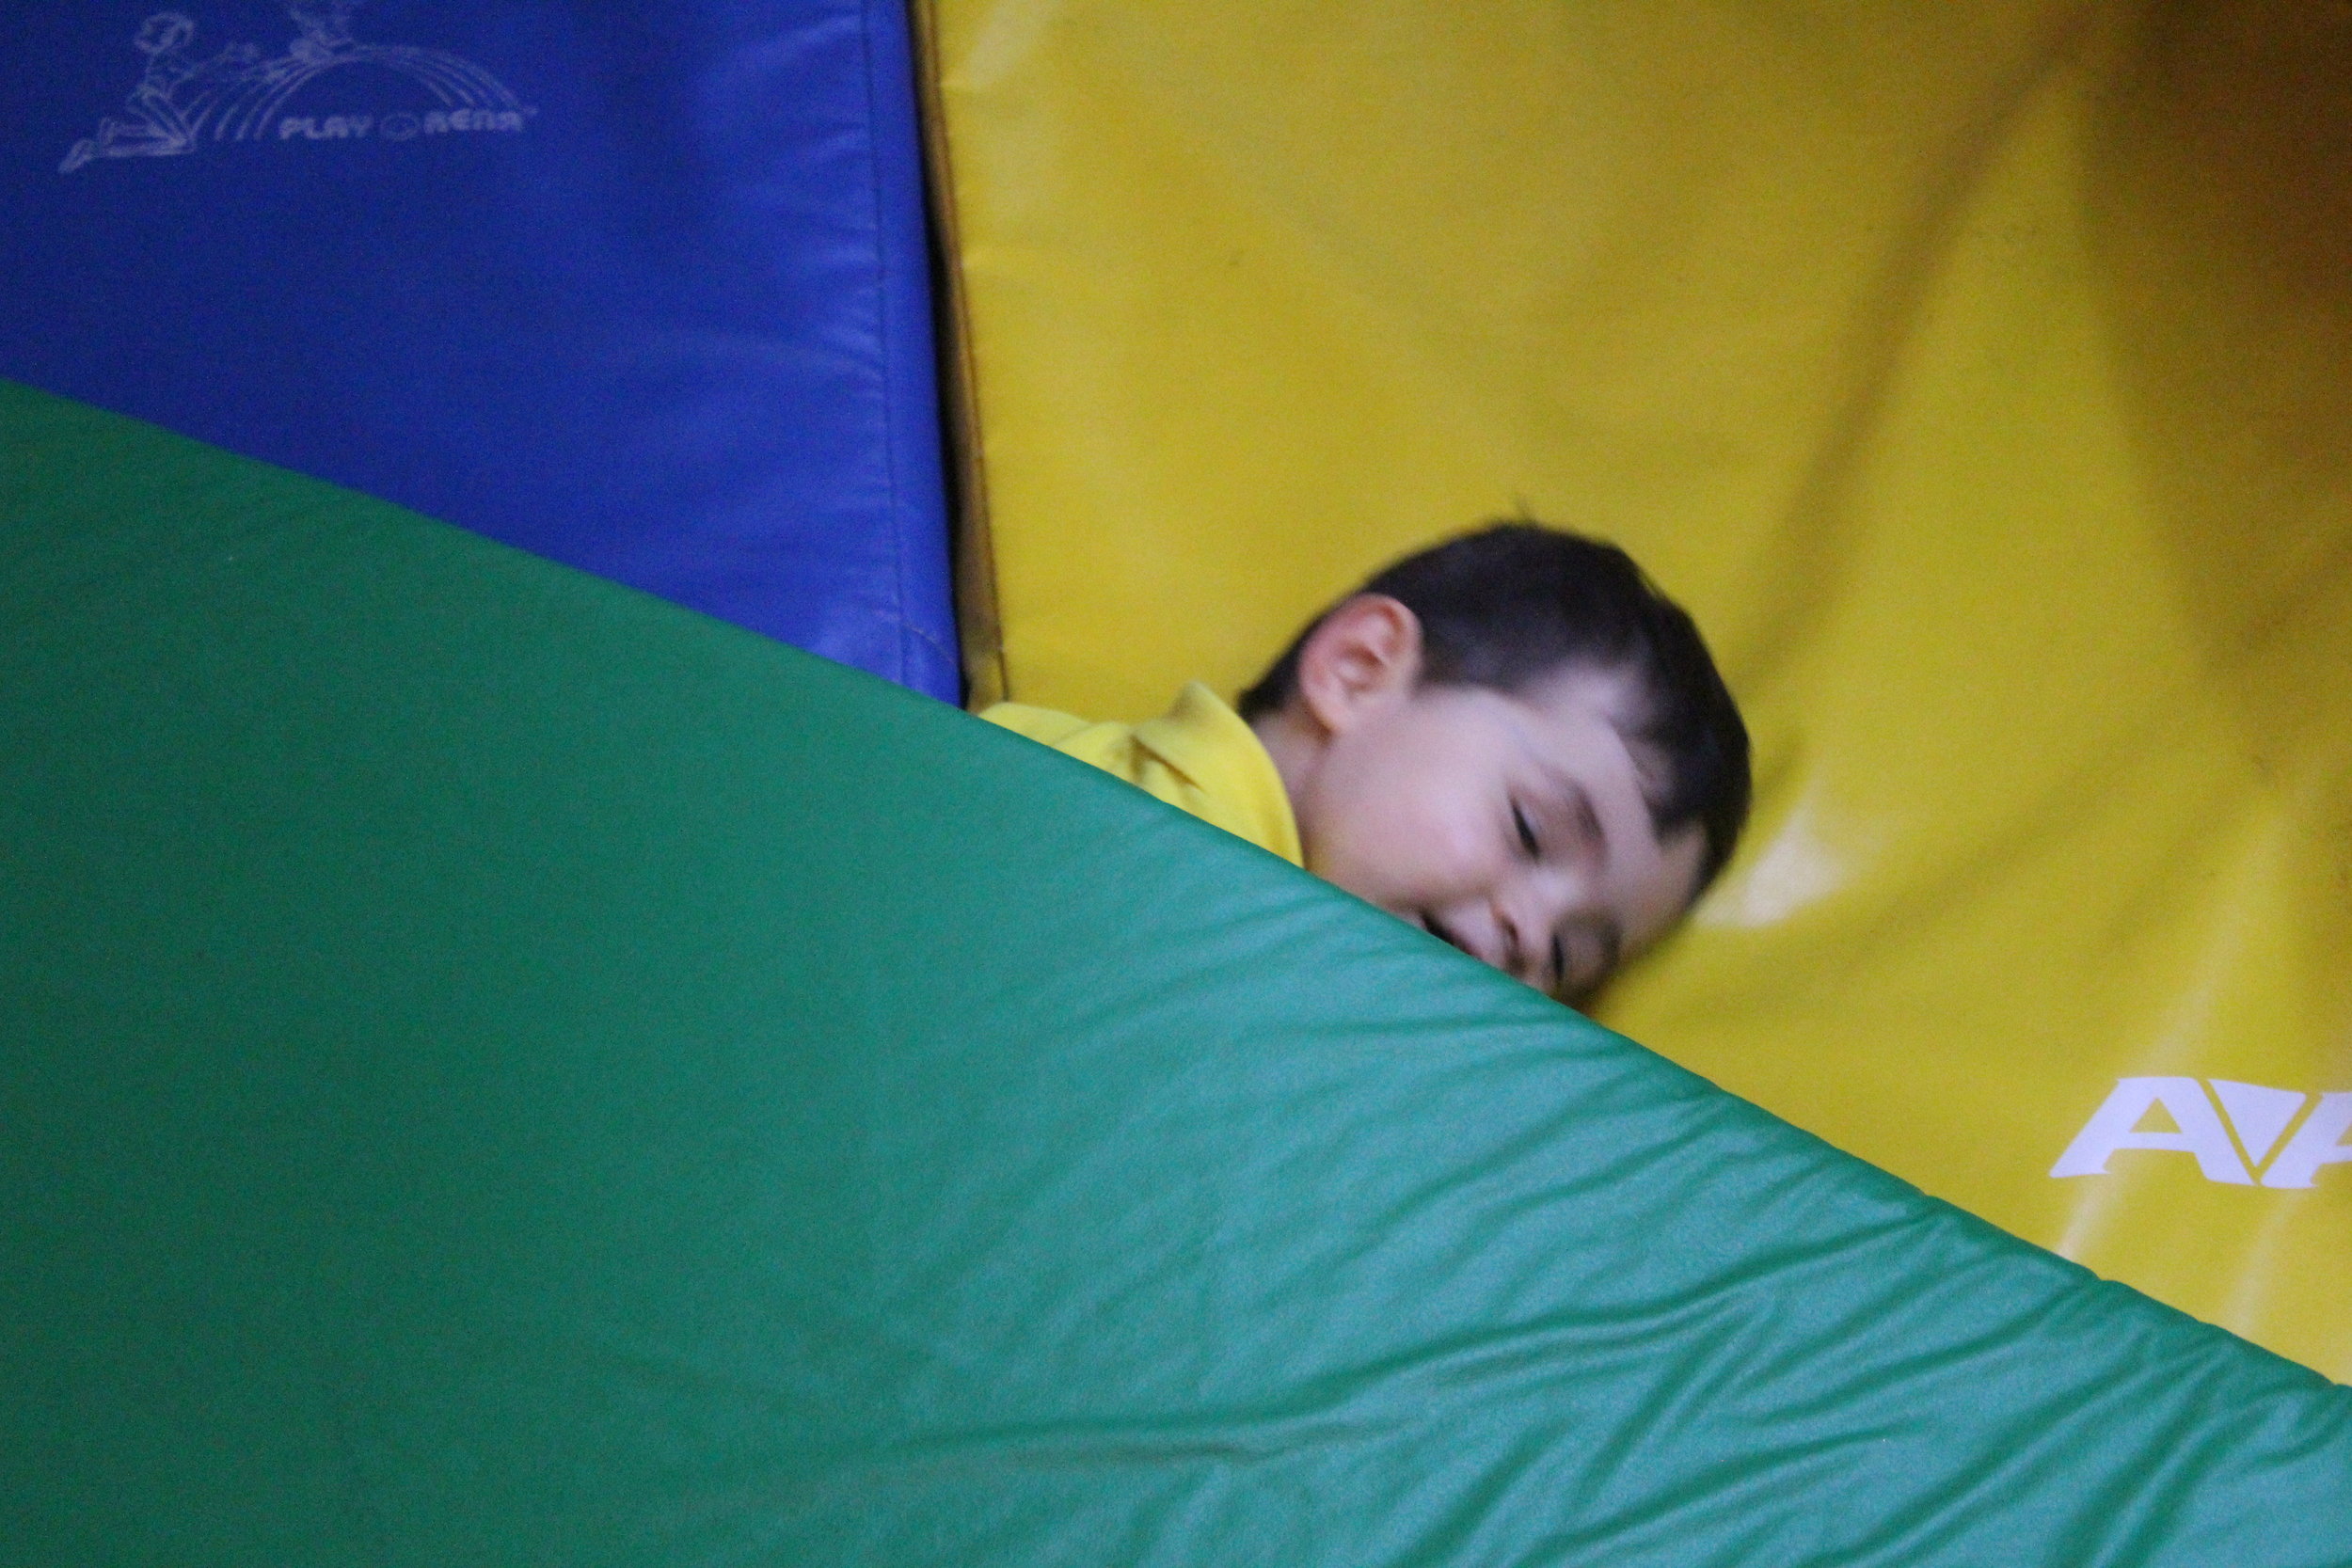  "Night, night!" - Emilio  Emilio demonstrating a key toddler play skill - imitating others by pretending to sleep - all the while doing it with a smile and humor!&nbsp; 